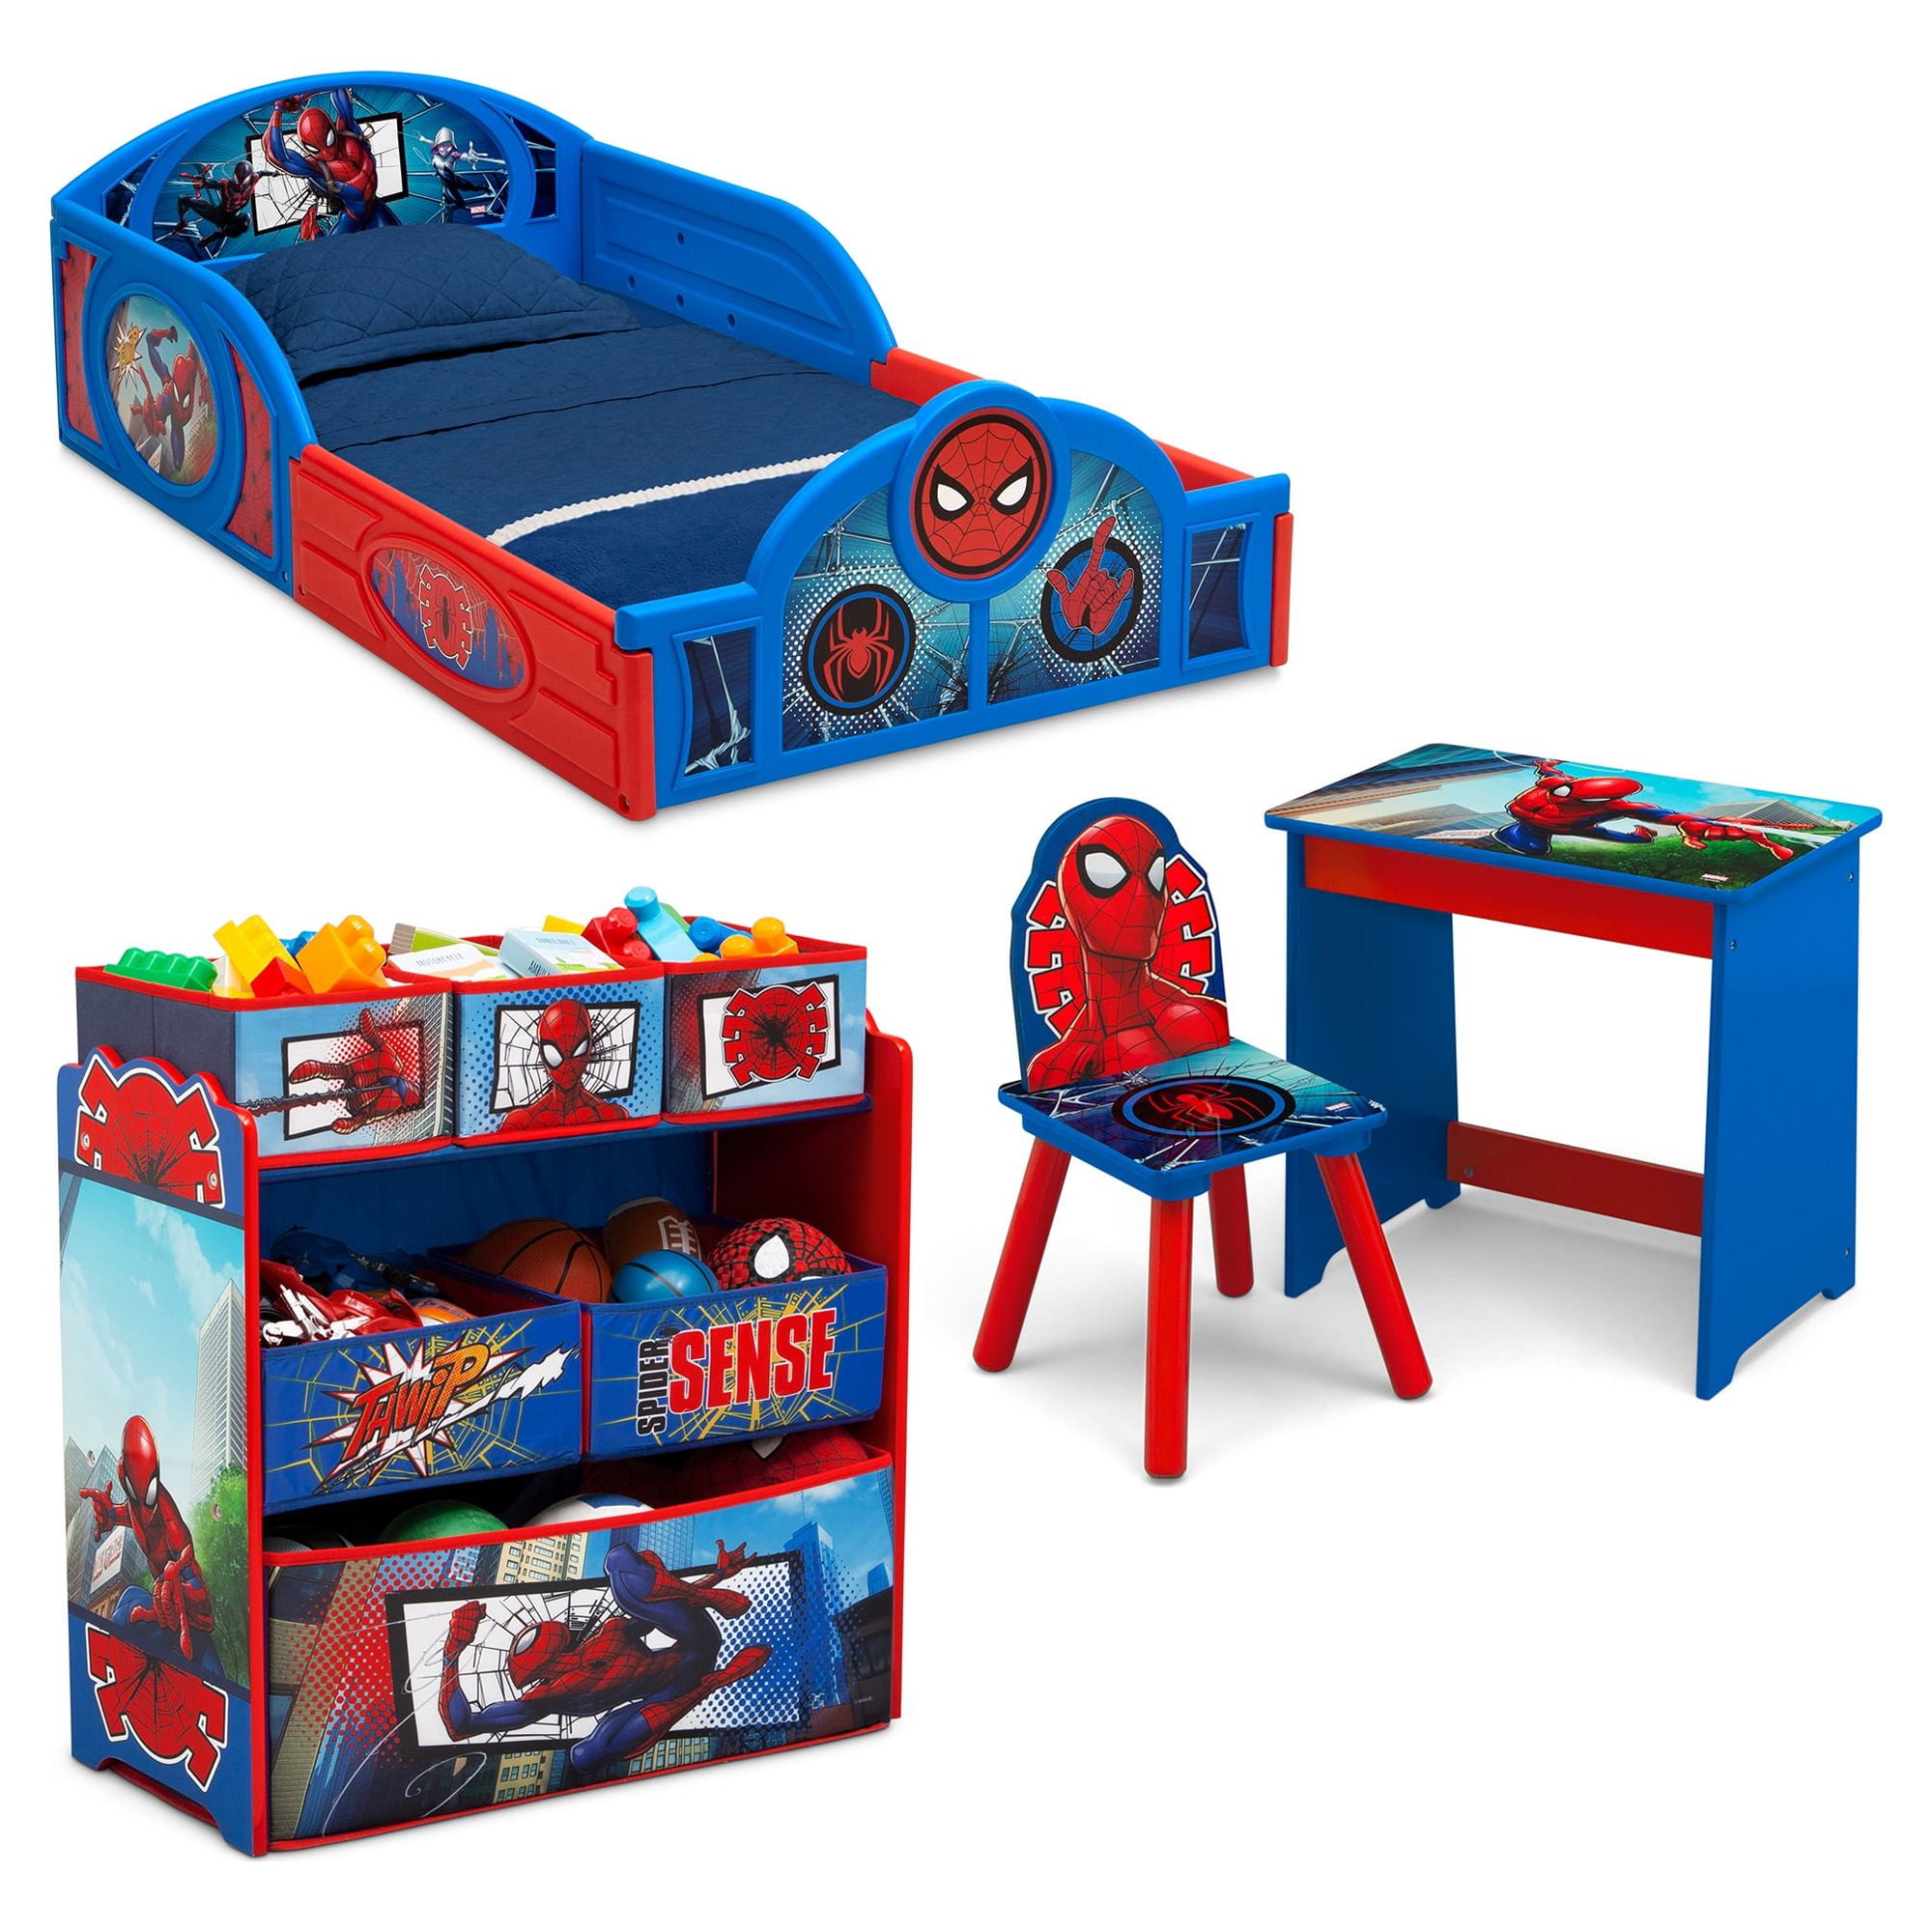 18 Awesome Toys for 11 Year Old Boys - That Are Not Video Games - Organize  by Dreams